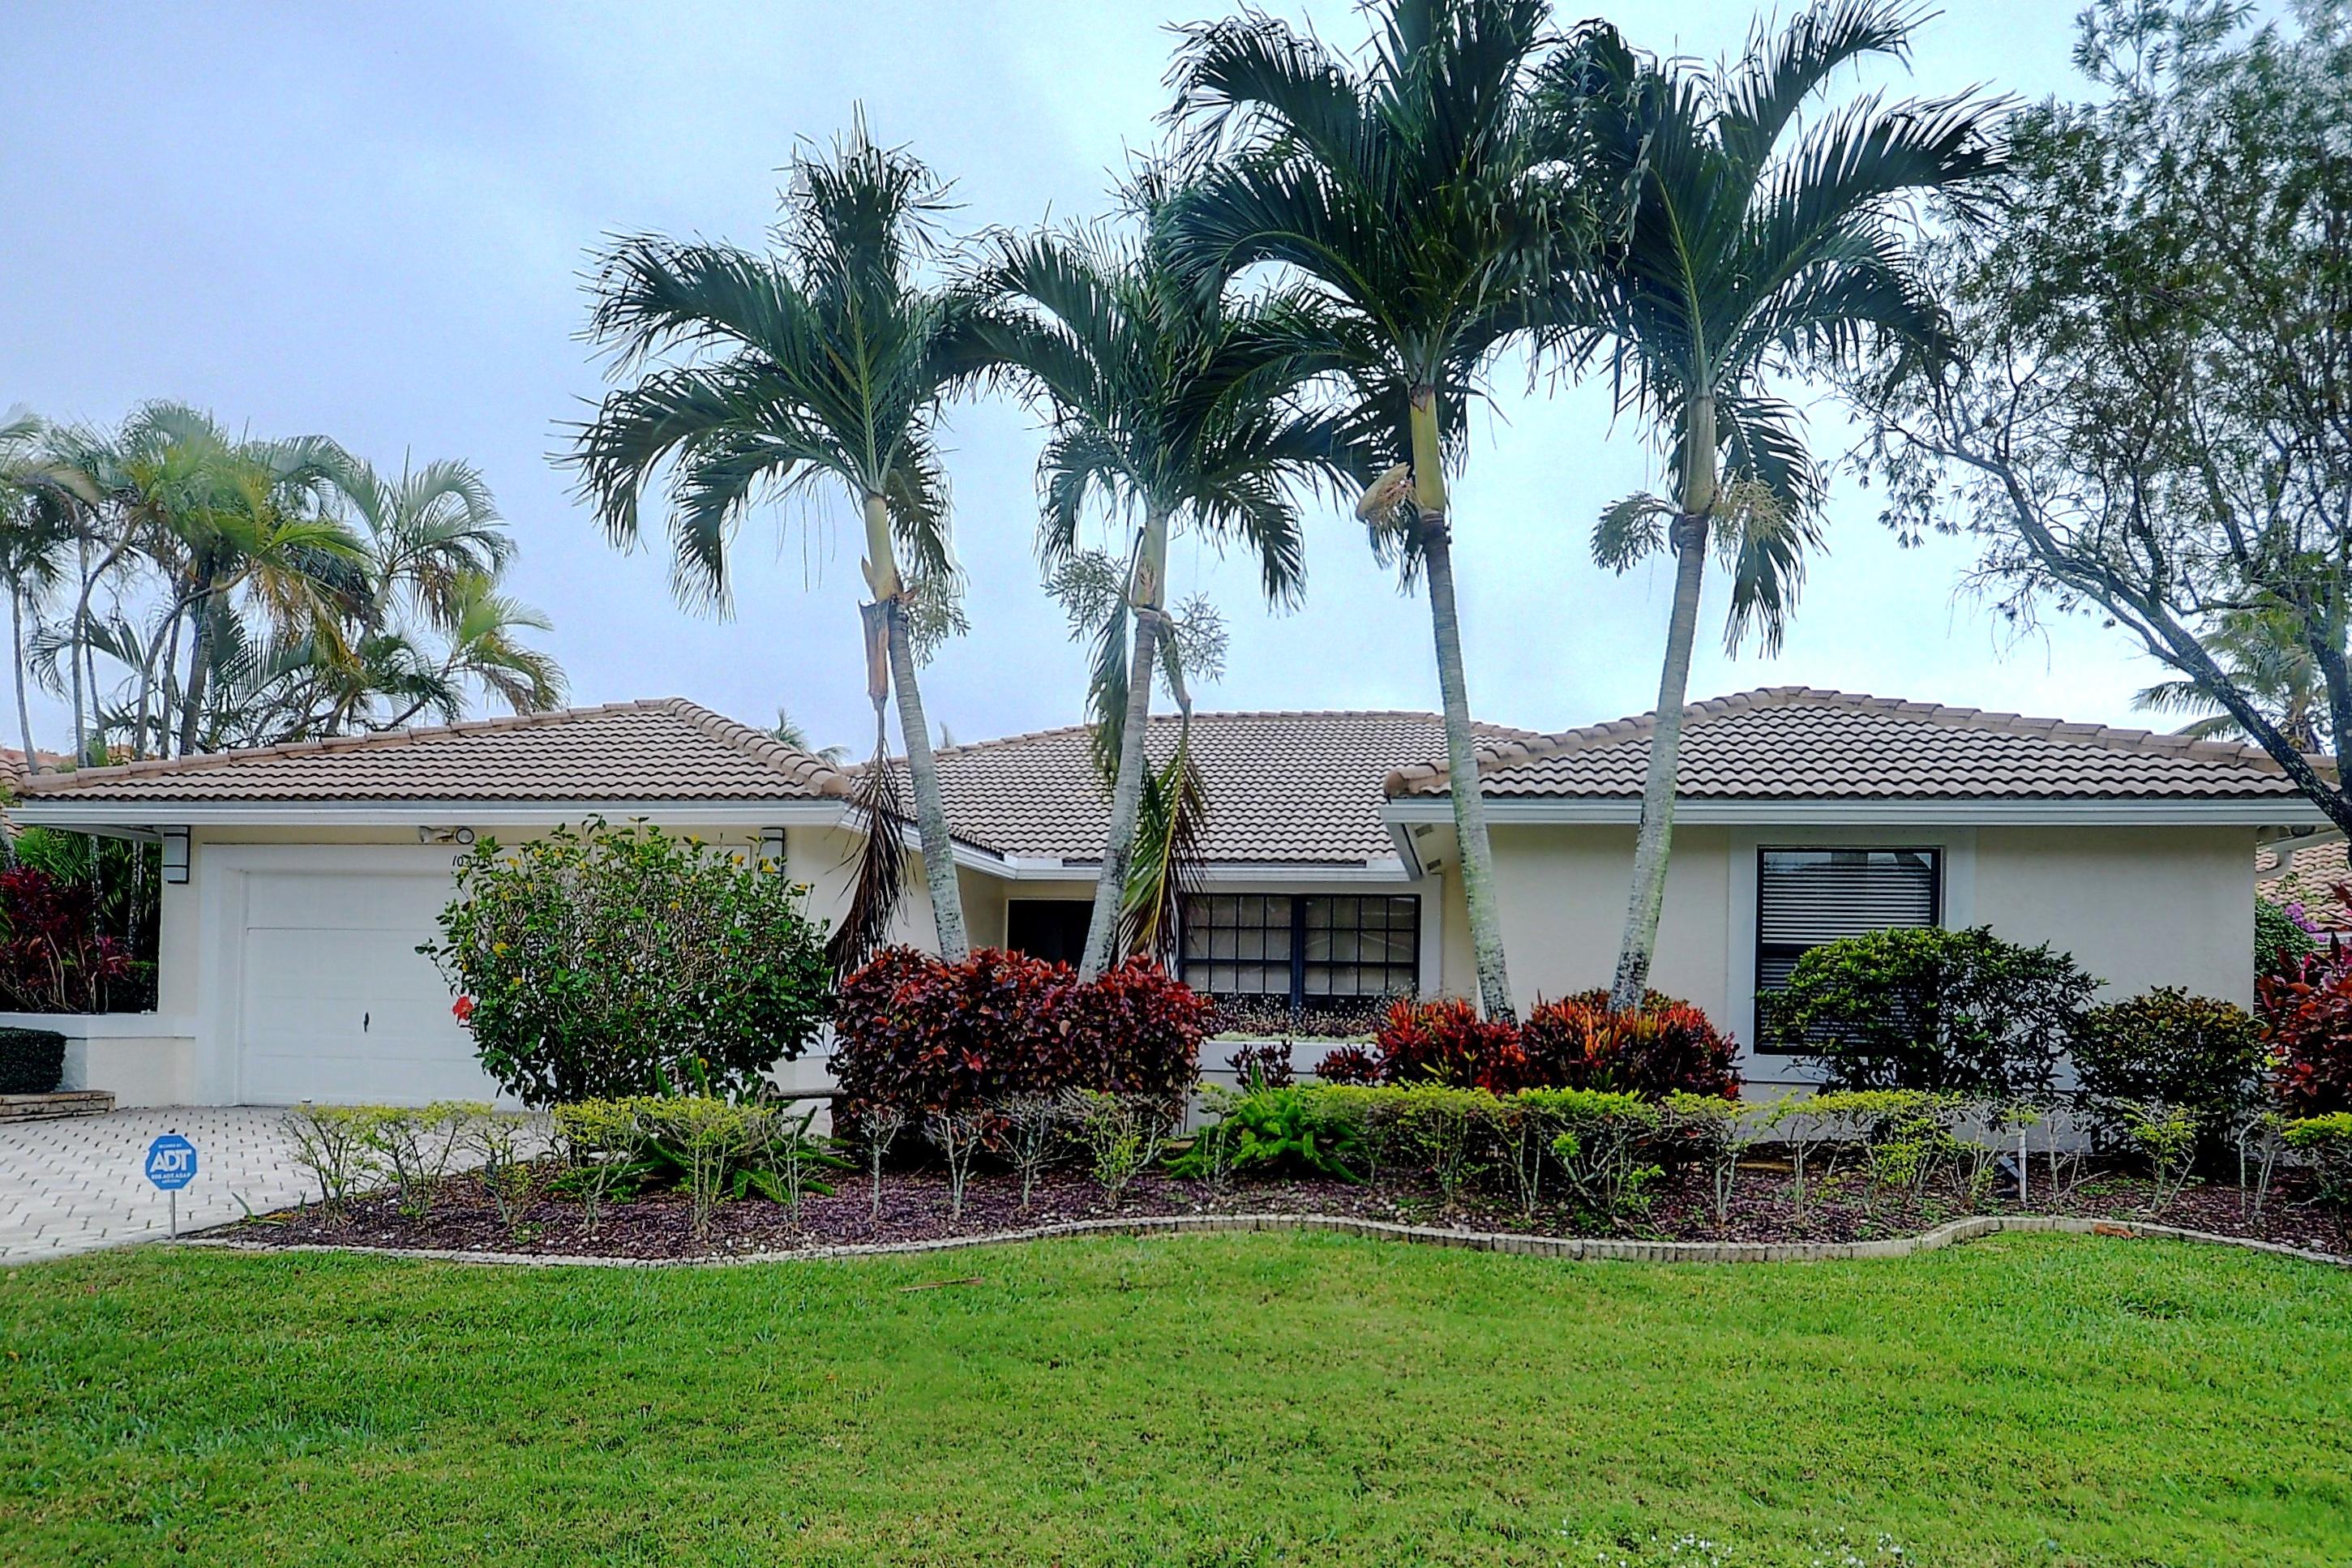 a front view of a house with a garden and palm trees